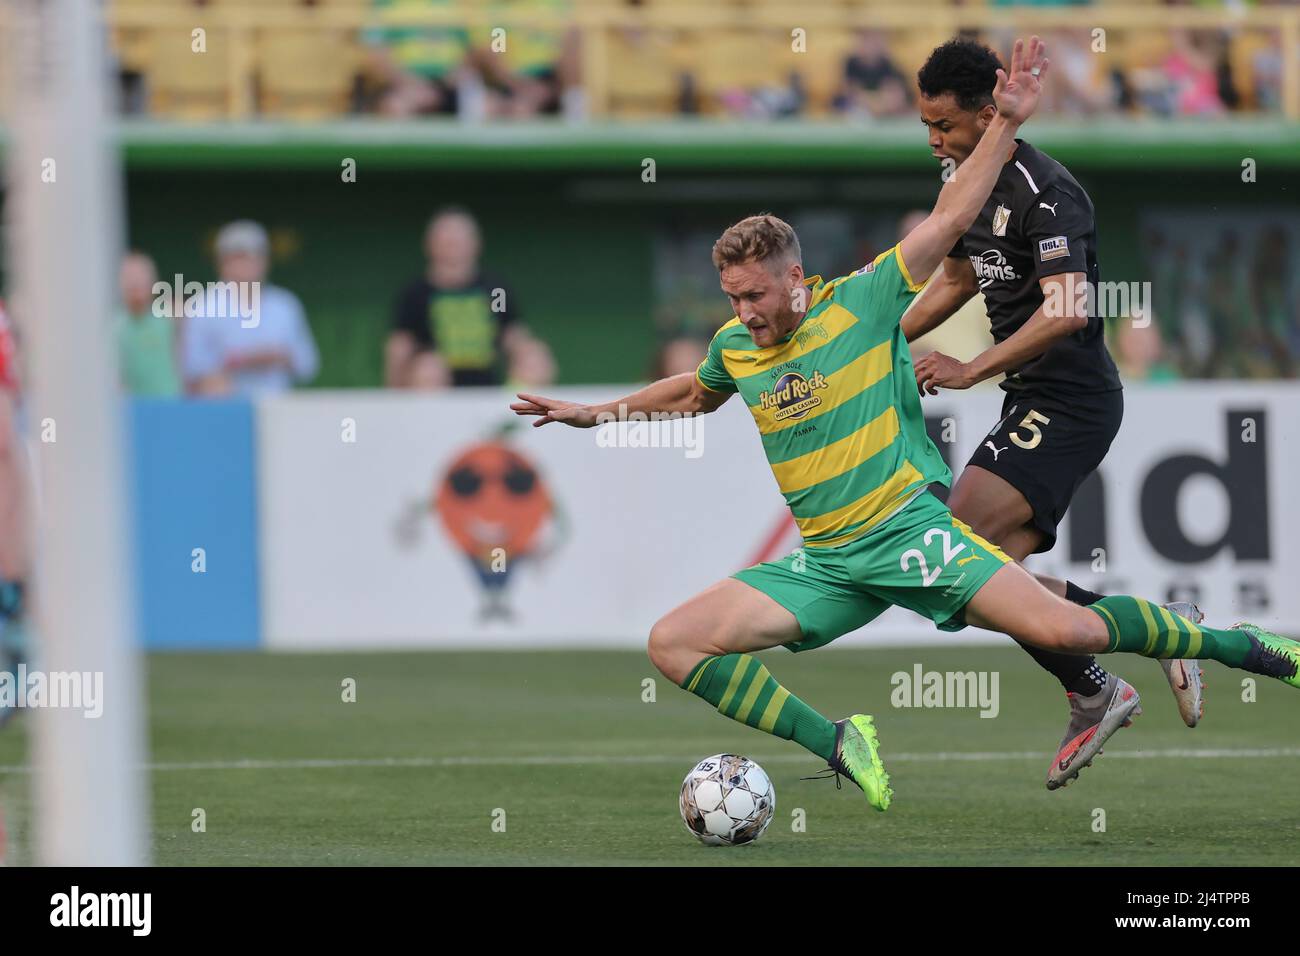 St. Petersburg, FL: Tampa Bay Rowdies forward Kyle Greig (22) is tripped up on the play by FC Tulsa midfielder Frantzly Zephirin (5) during a USL socc Stock Photo